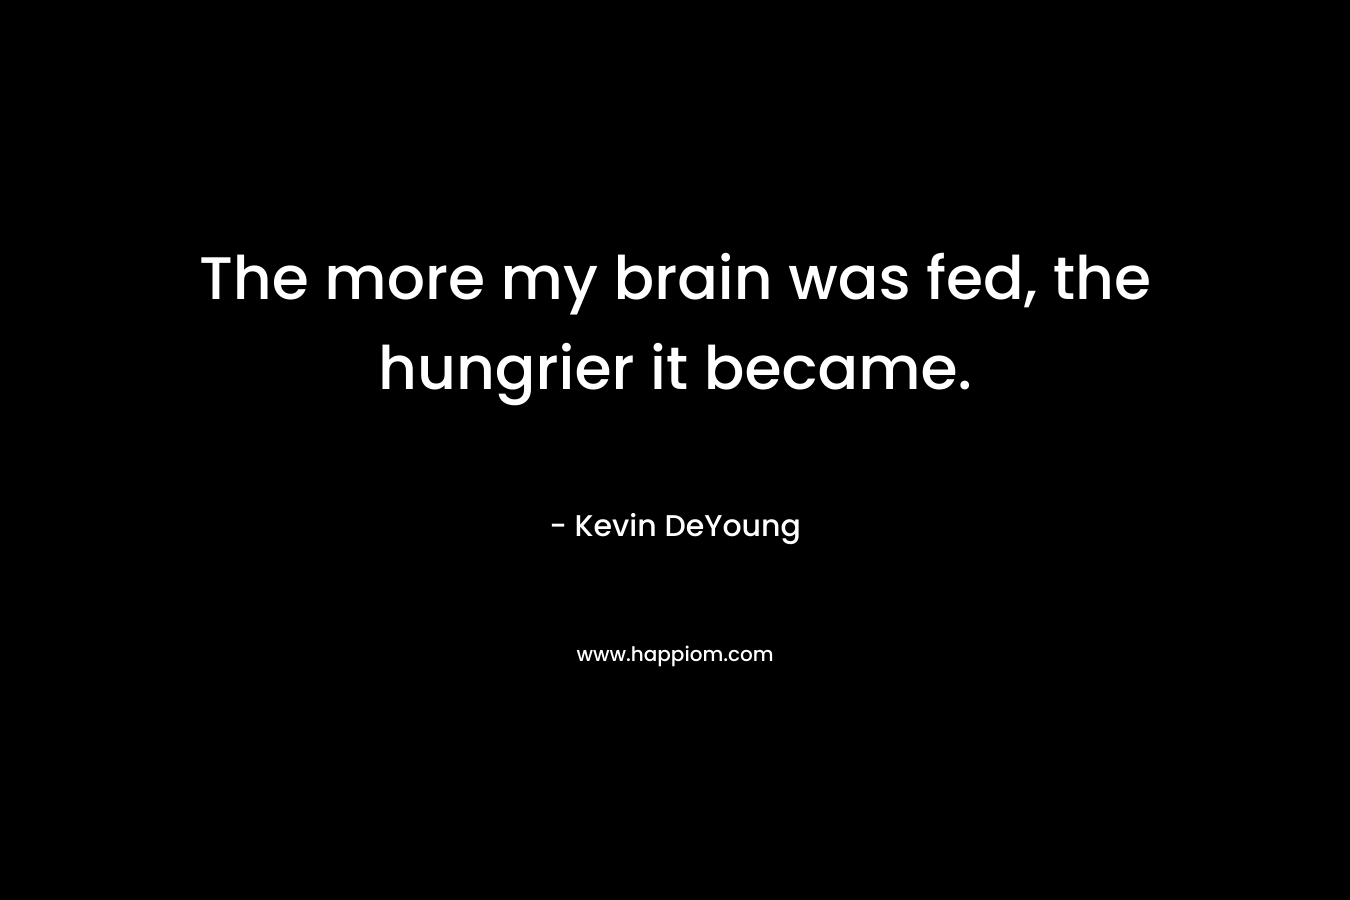 The more my brain was fed, the hungrier it became. – Kevin DeYoung